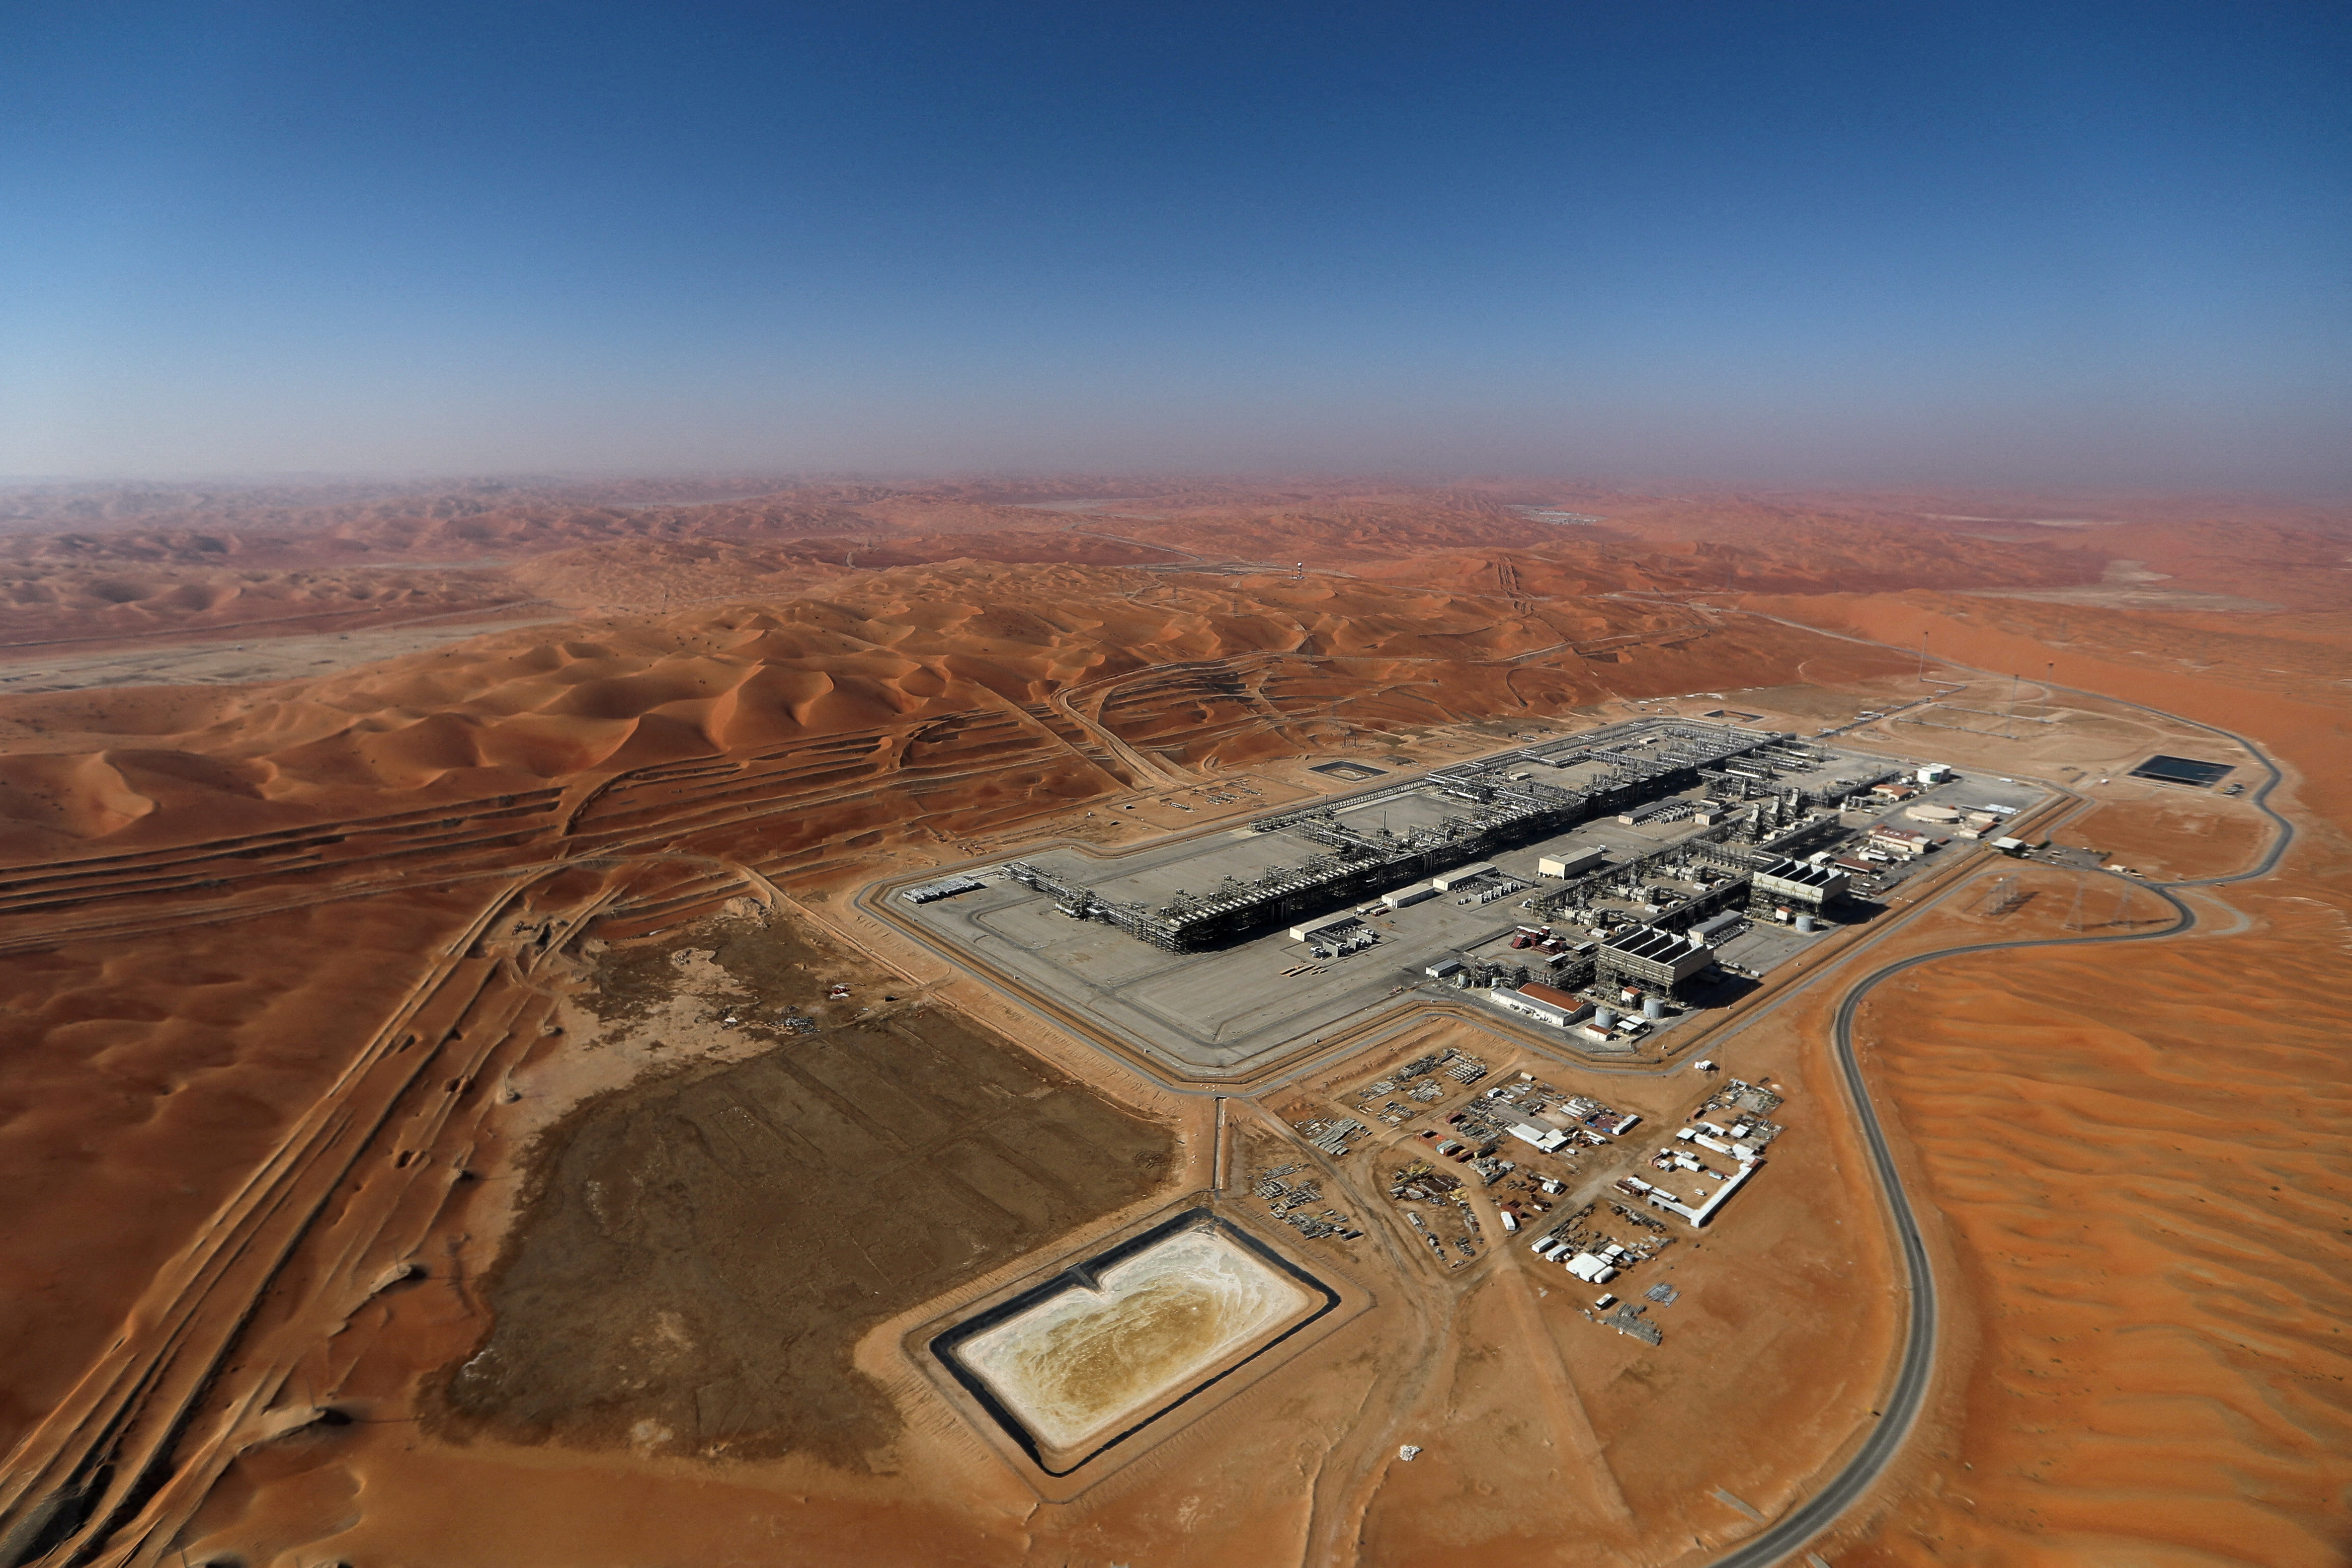 General view of Aramco's oil field in the Empty Quarter